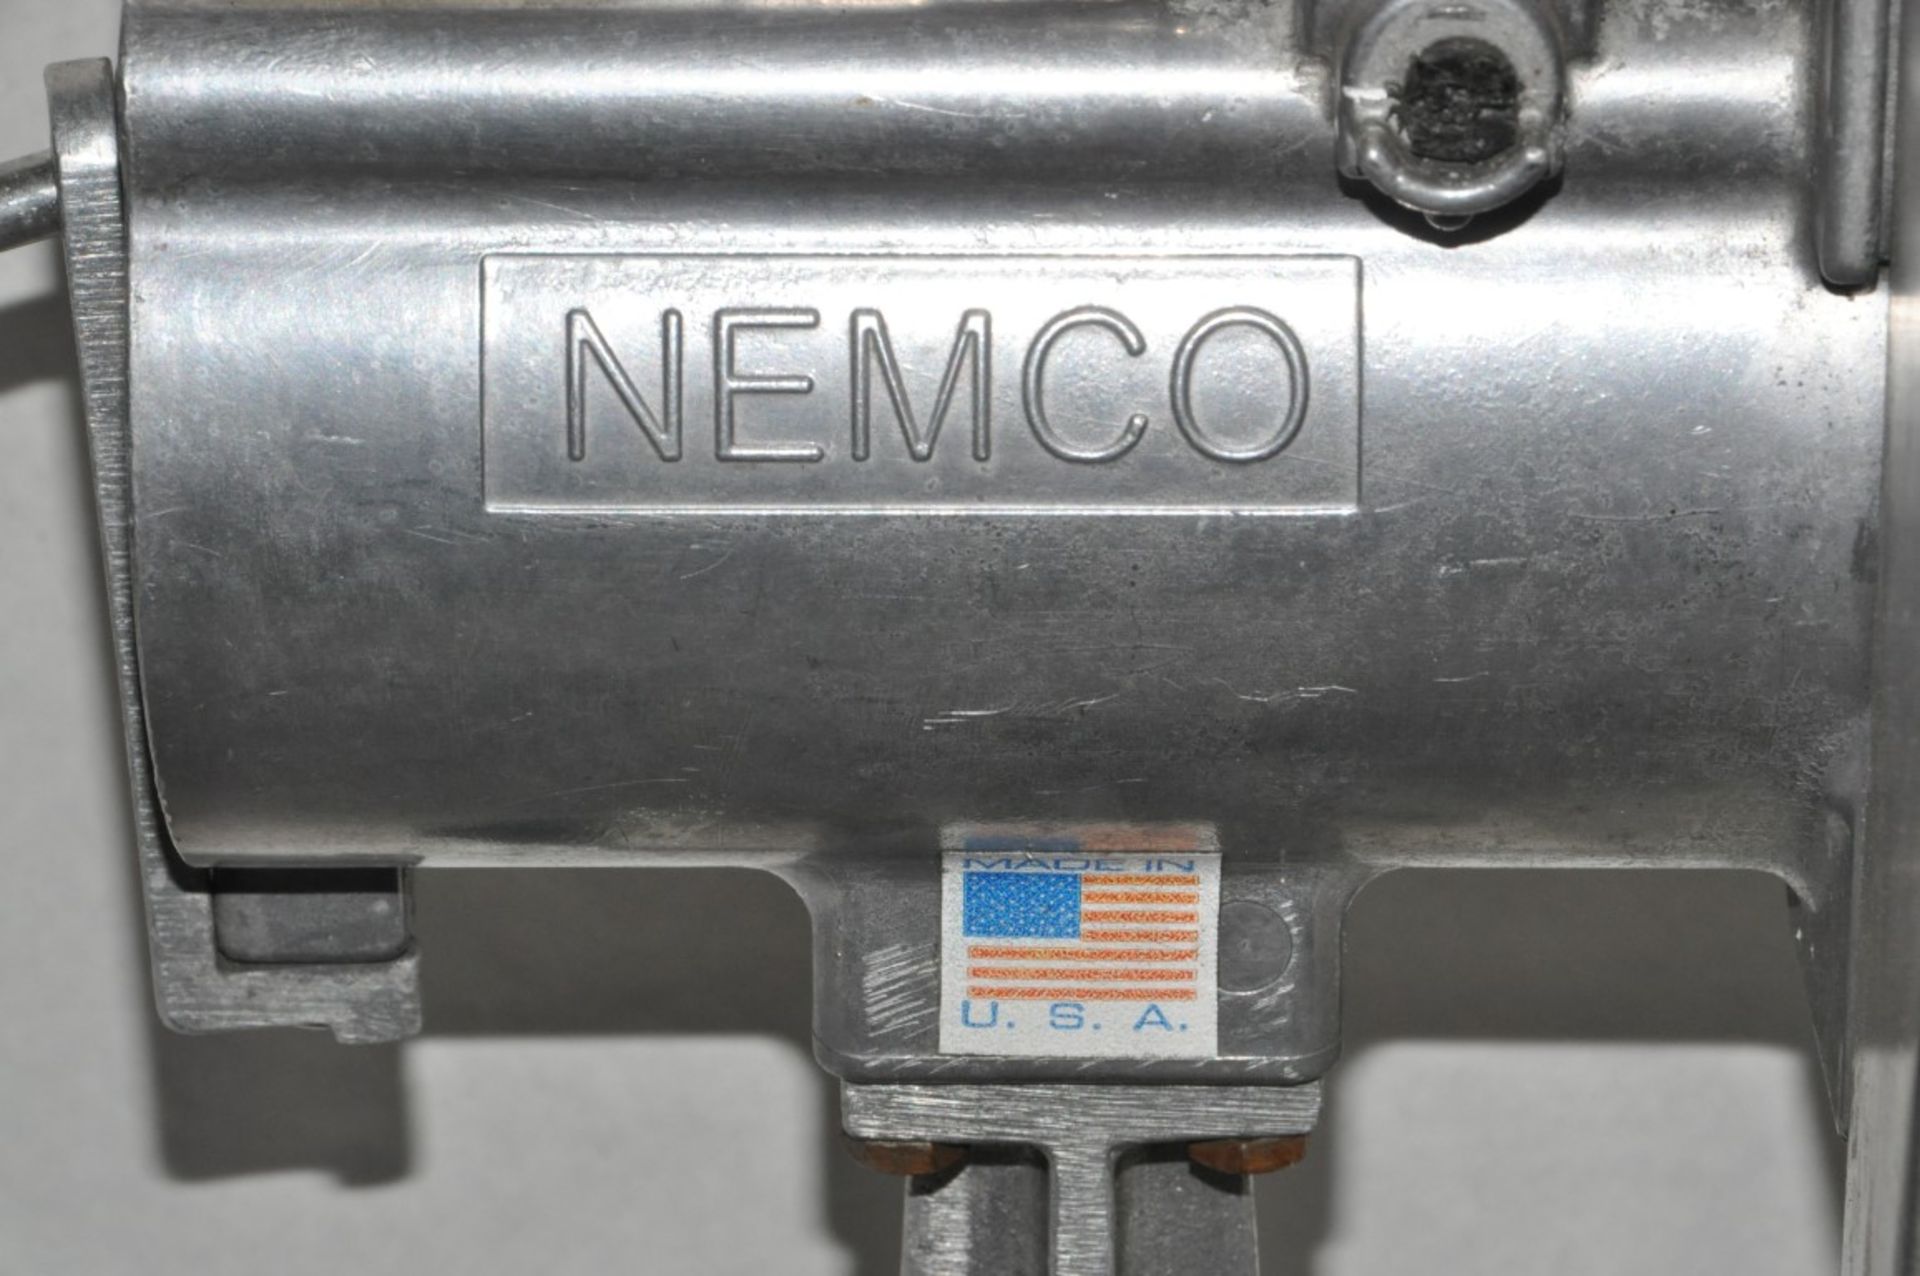 1 x Nemco Easy Slicer™ Vegetable Slicer - Includes Portable Base - Used, In Working Condition - - Image 5 of 6